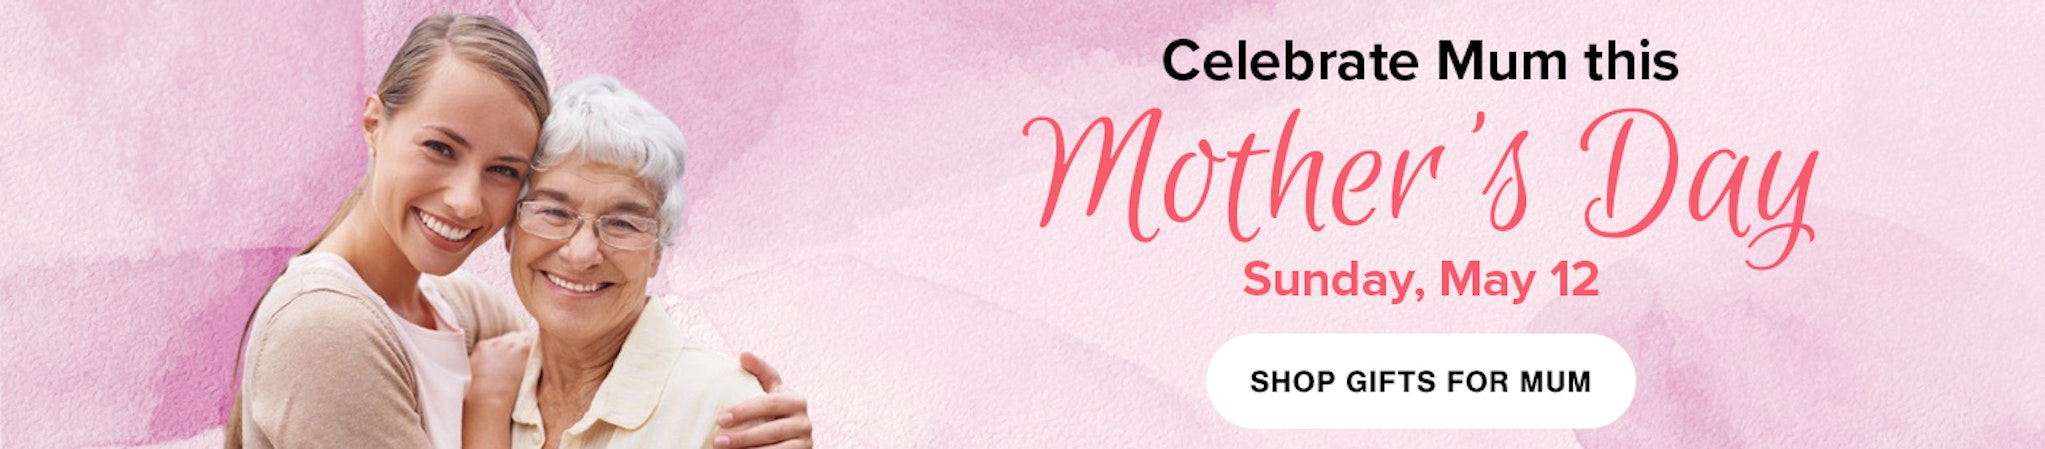 Celebrate Mum this Mother's Day!